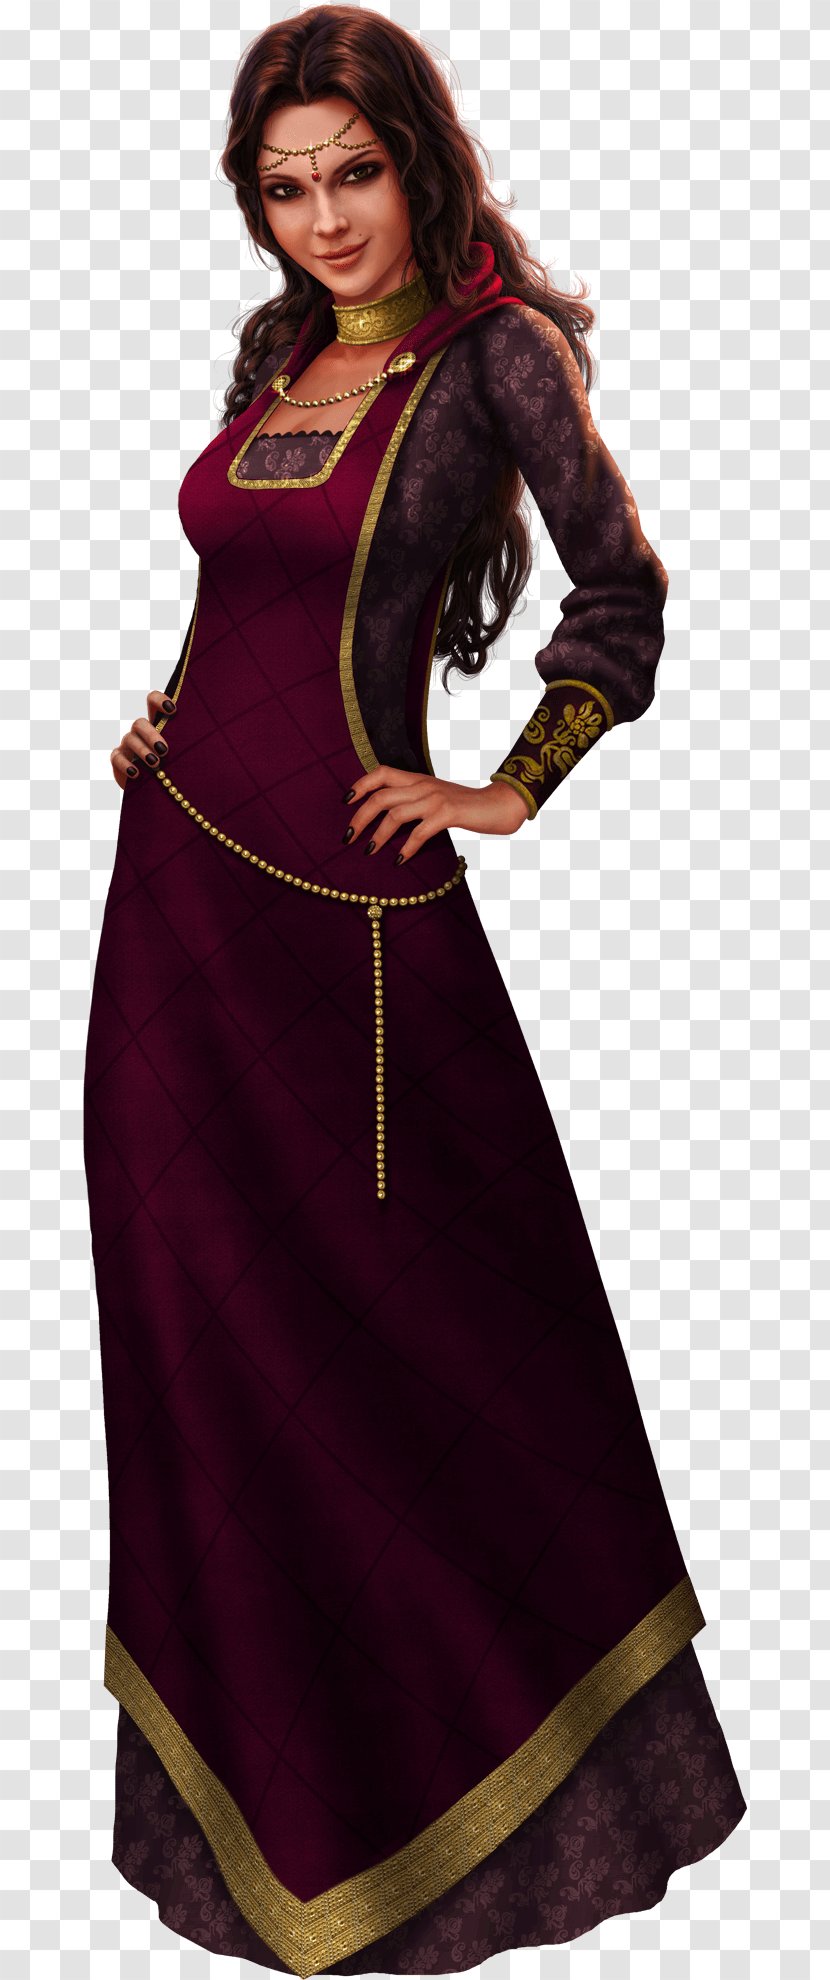 The Sims Medieval: Pirates And Nobles 3: Ambitions 2 World Adventures Seasons - 3 - Medieval Dresses Transparent PNG